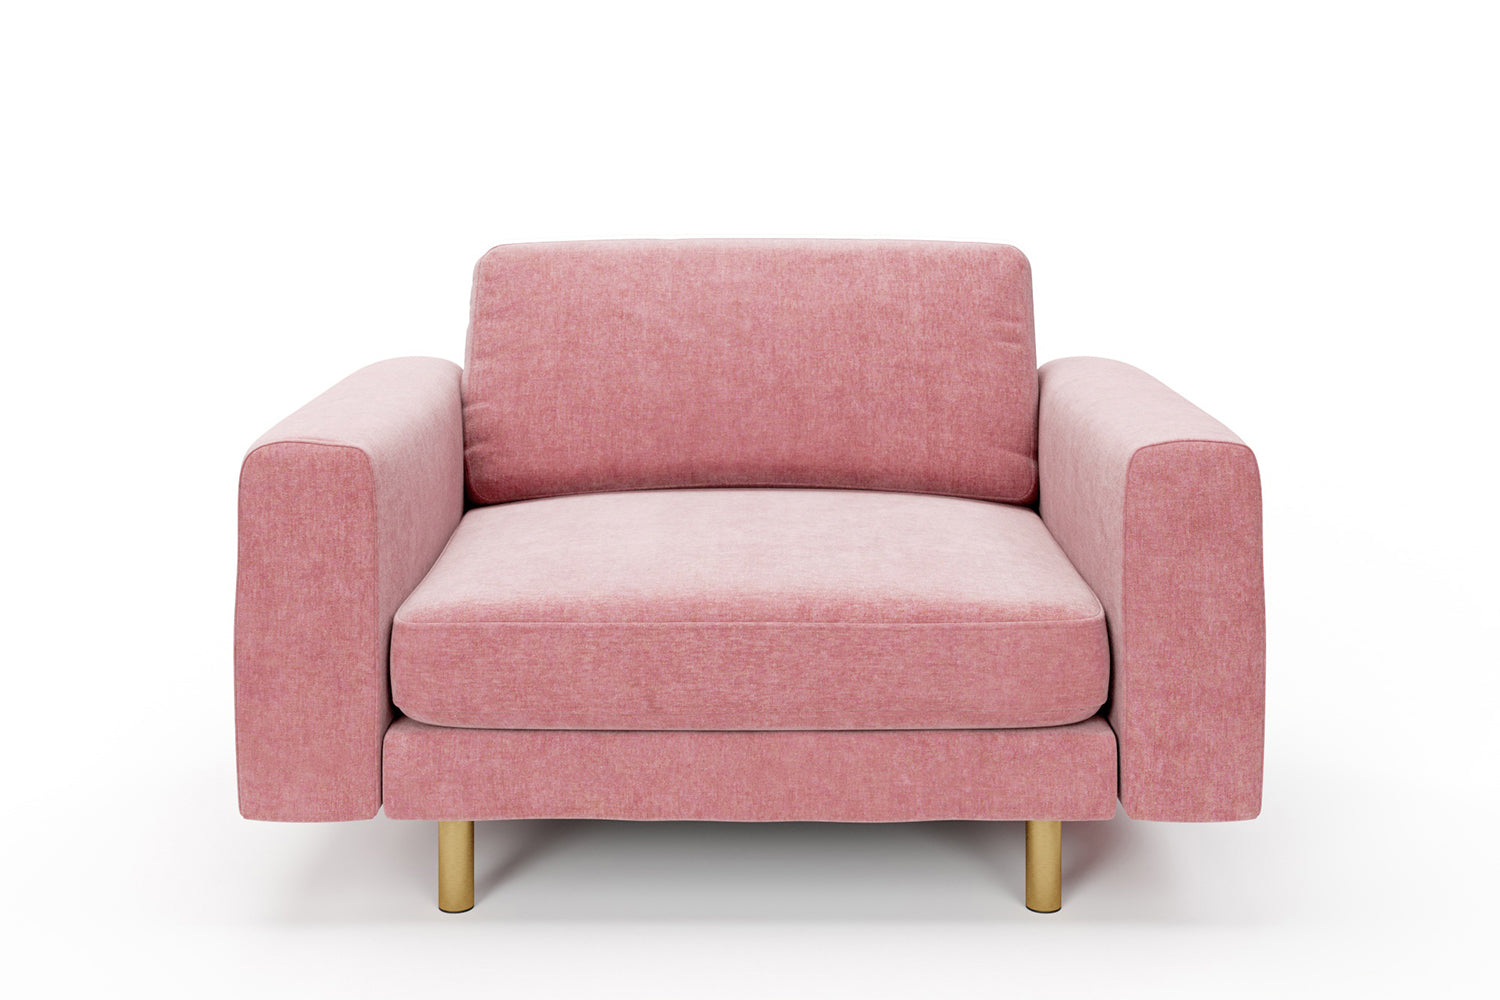 SNUG | The Big Chill 1.5 Seater Snuggler in Blush Coral variant_40621892501552